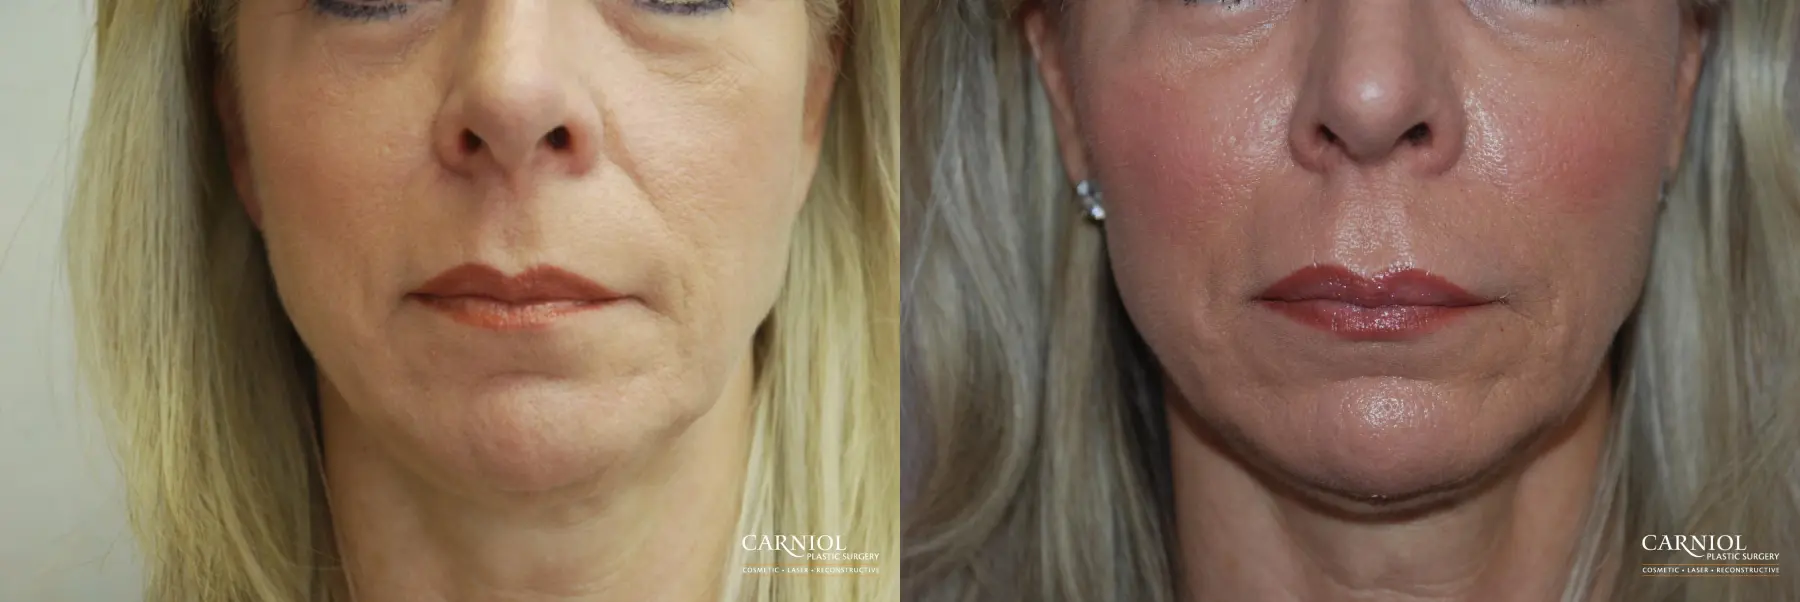 Non-Surgical Facelift: Patient 9 - Before and After 1